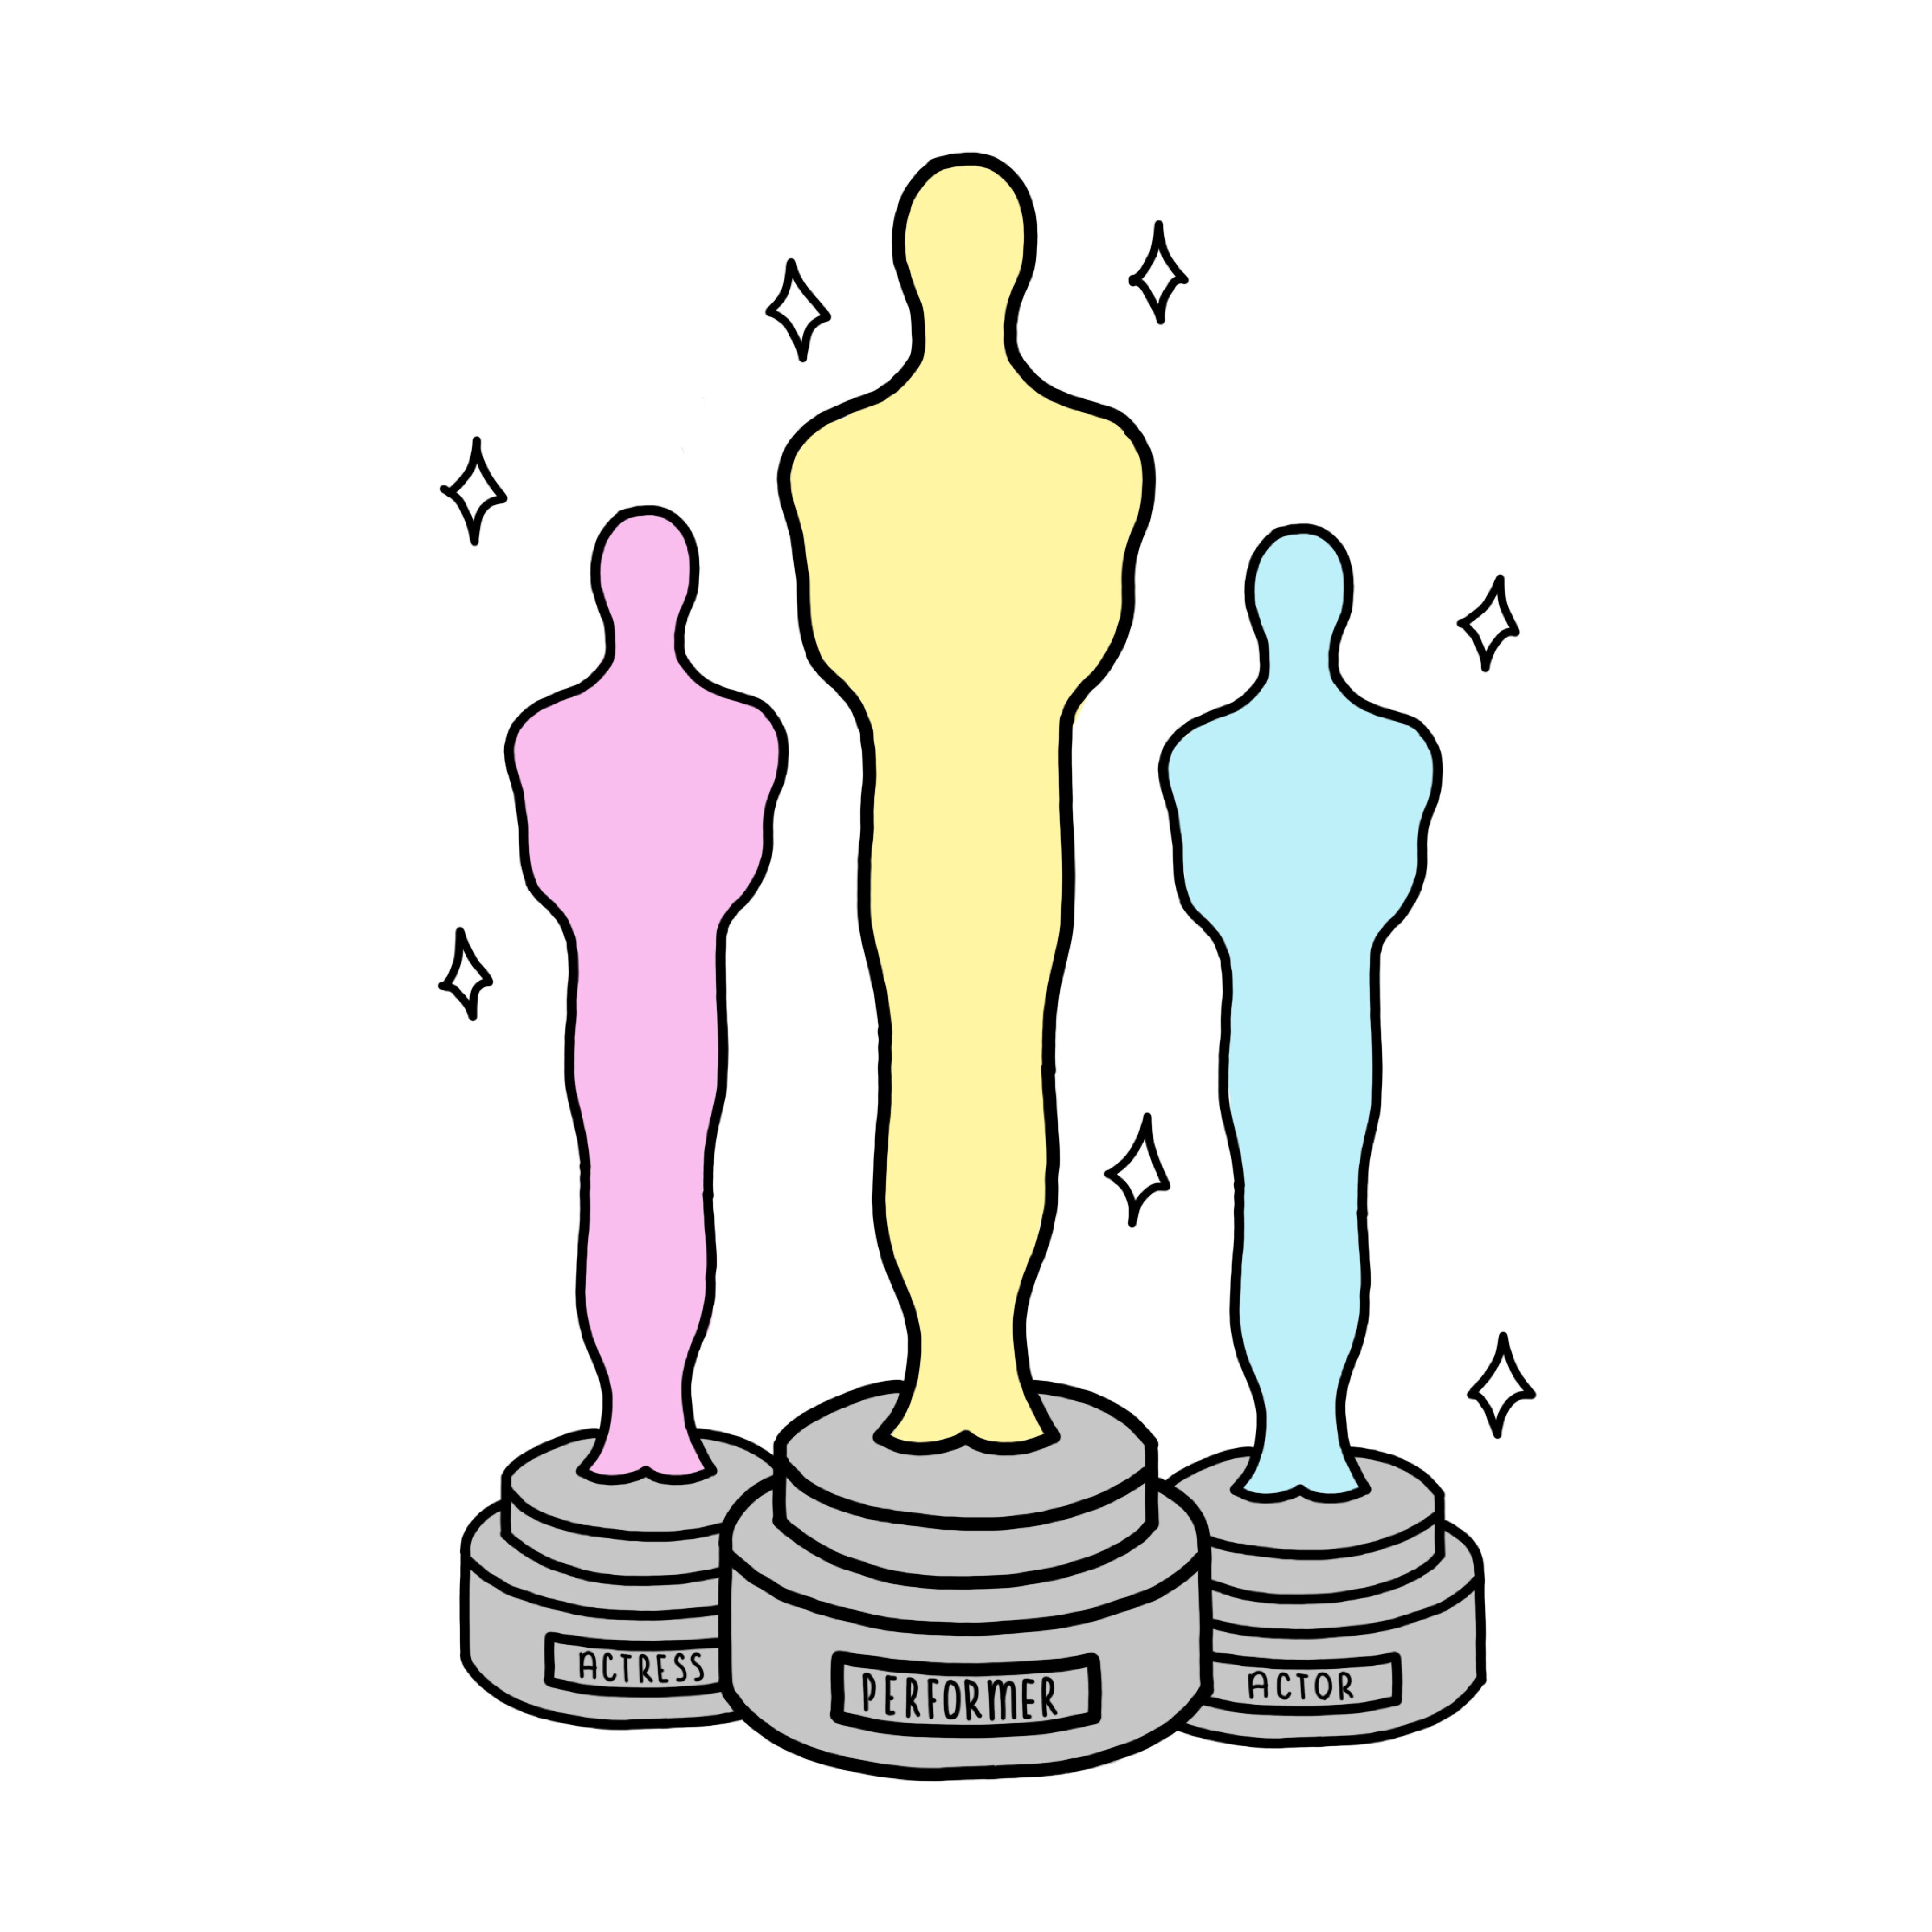 Some awards shows are considering going completely gender-neutral to be more inclusive towards gender non-conforming actors, but this could lead to fewer opportunities for women to be nominated and win. 